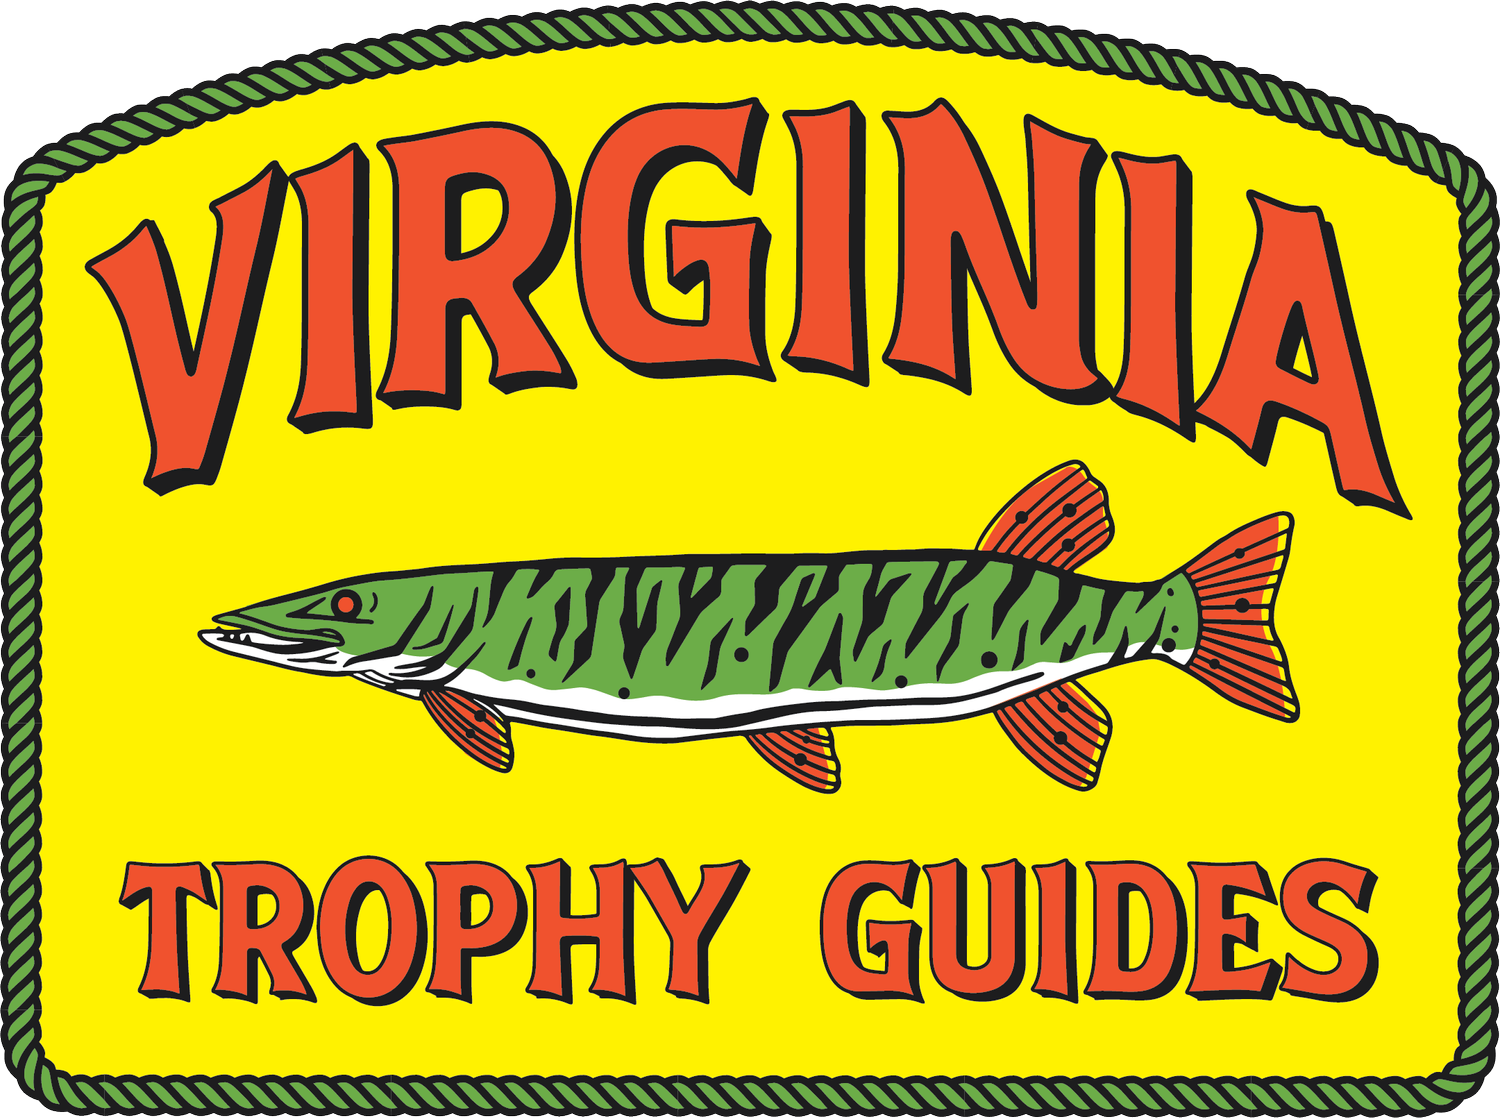 Virginia Trophy Guides